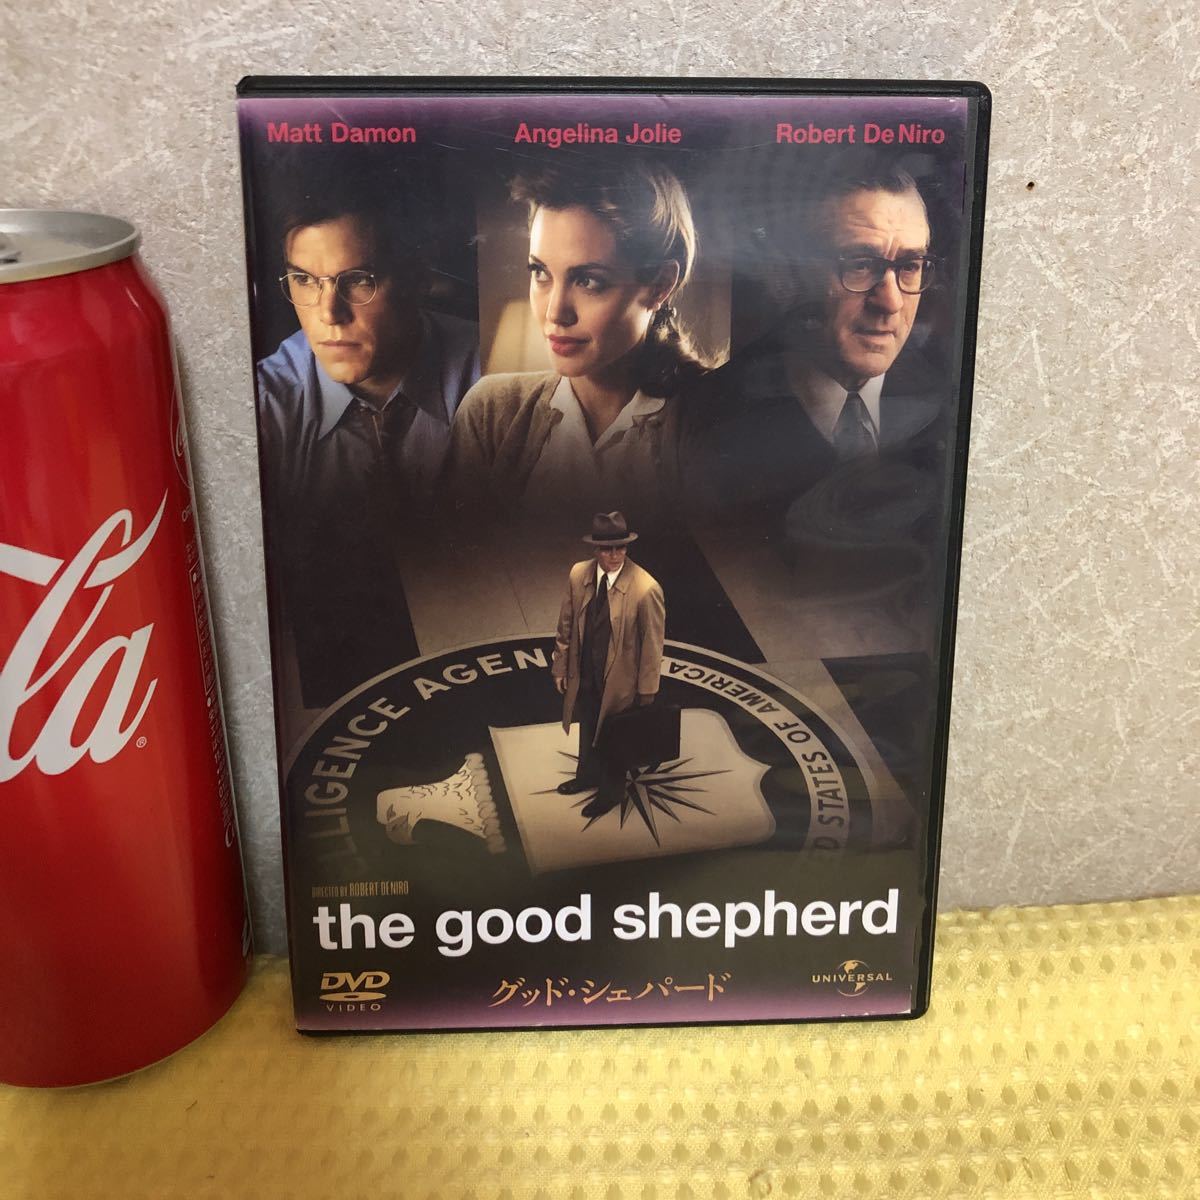 YK-1786( including in a package possible ) secondhand goods the good shepherdgdo*shepa-do Western films DVD CIA Edward * Wilson 